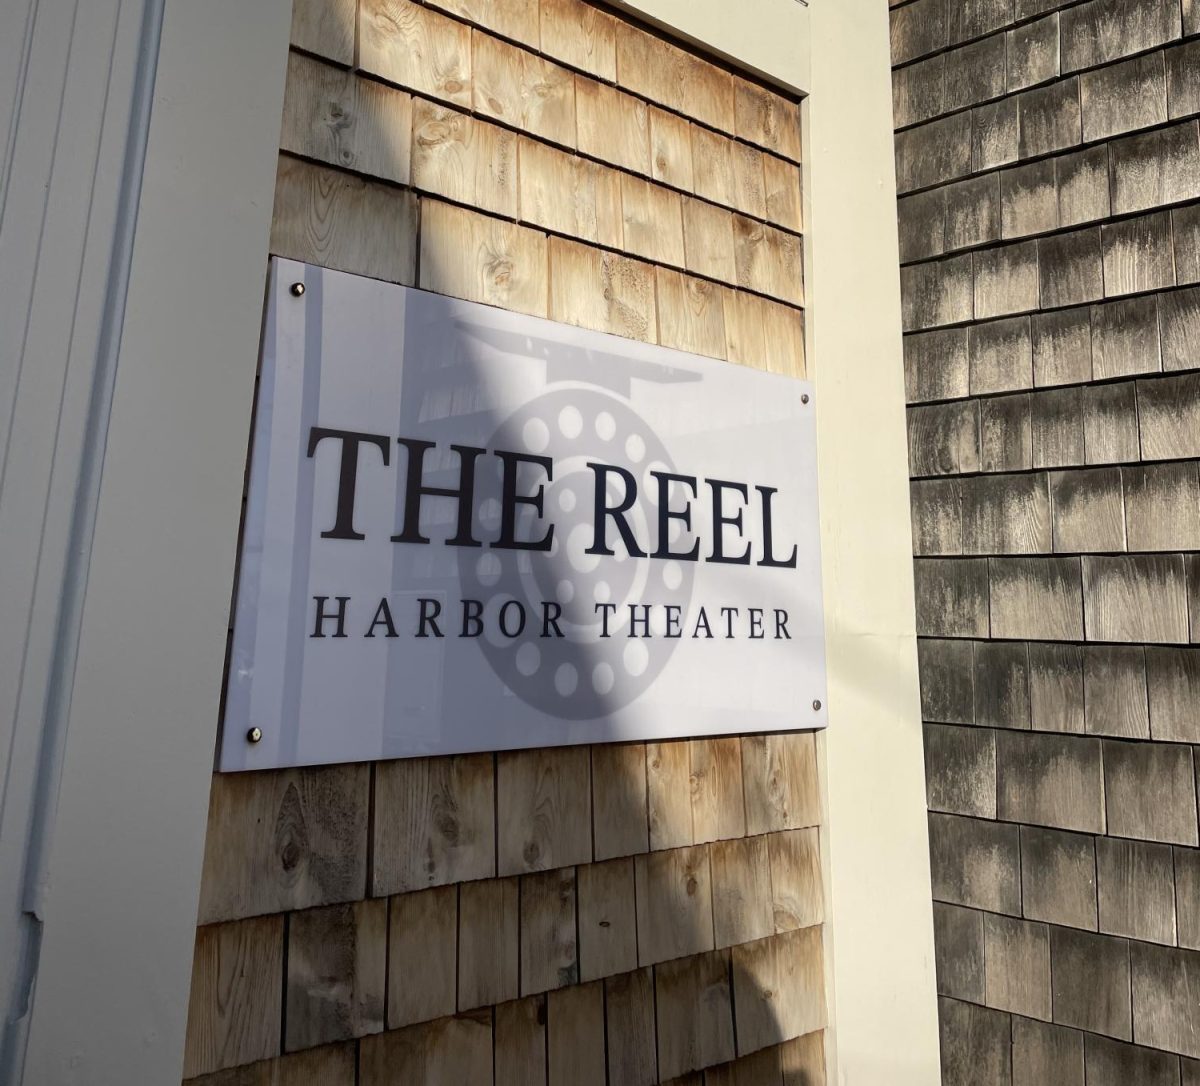 The Reel movie theater is located in Scituate Harbor